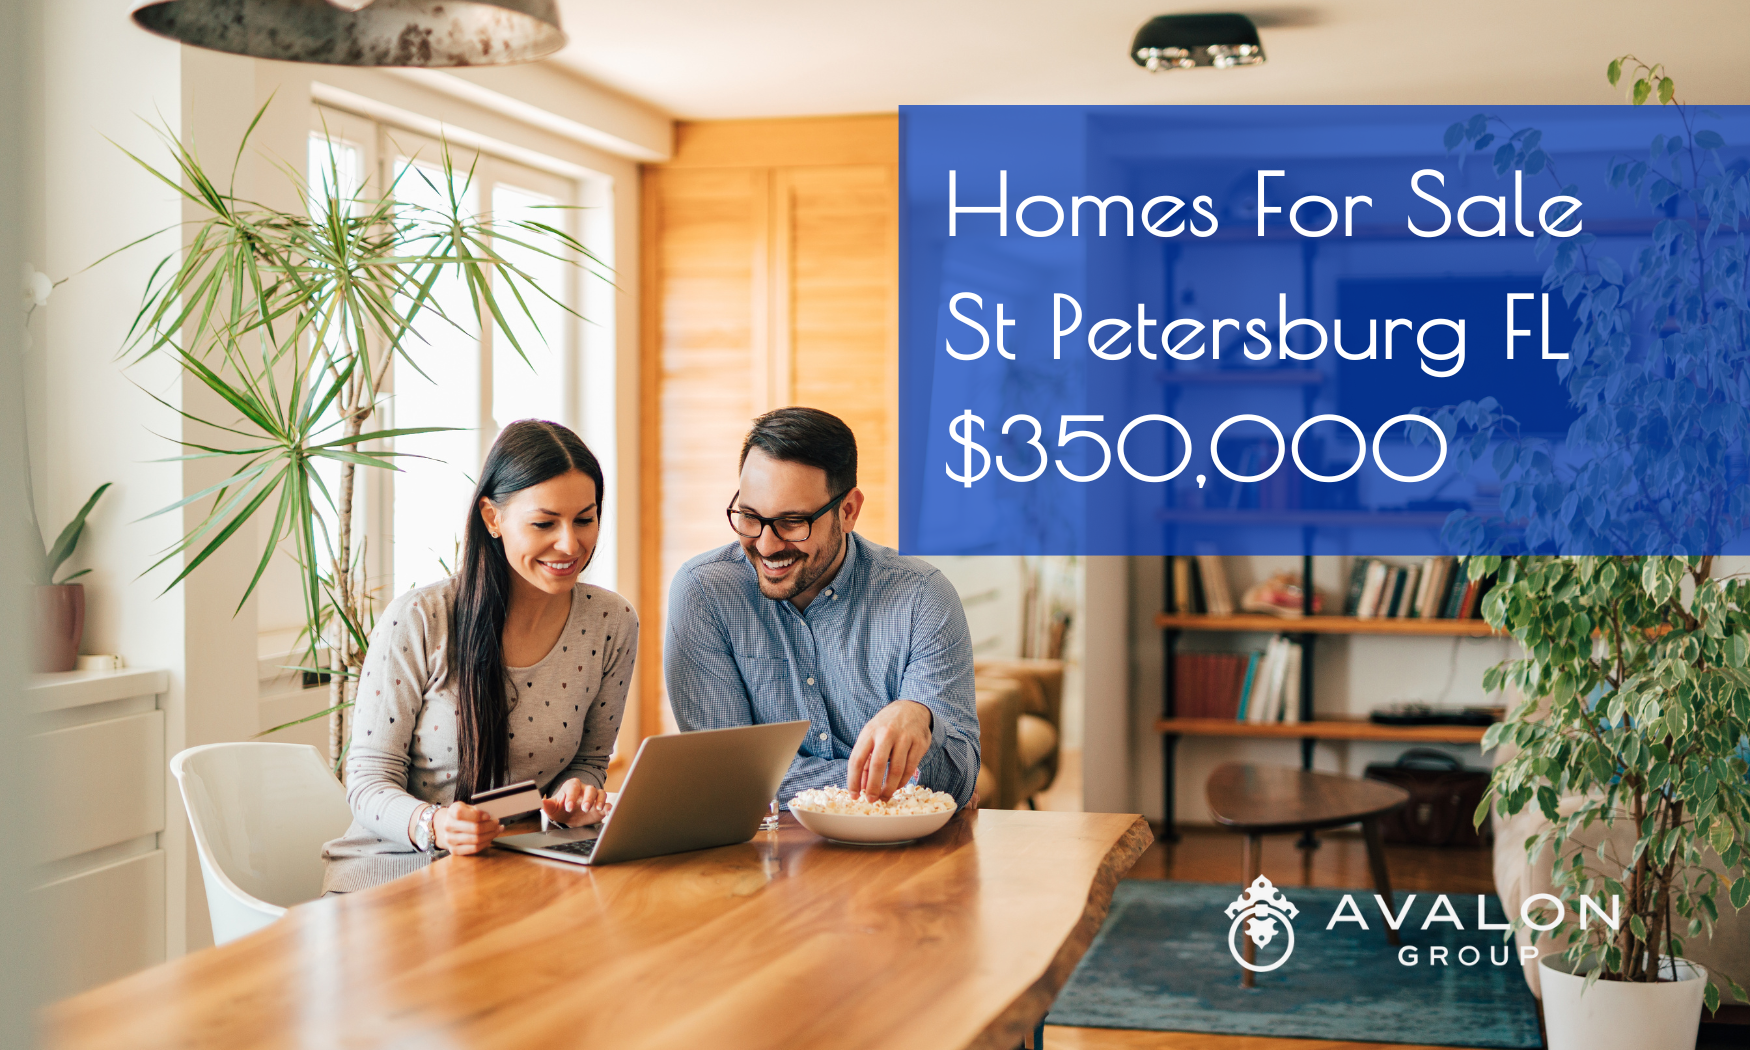 Homes For Sale St Petersburg Cover Pictures shows a married couple in a kitchen looking at a laptop.